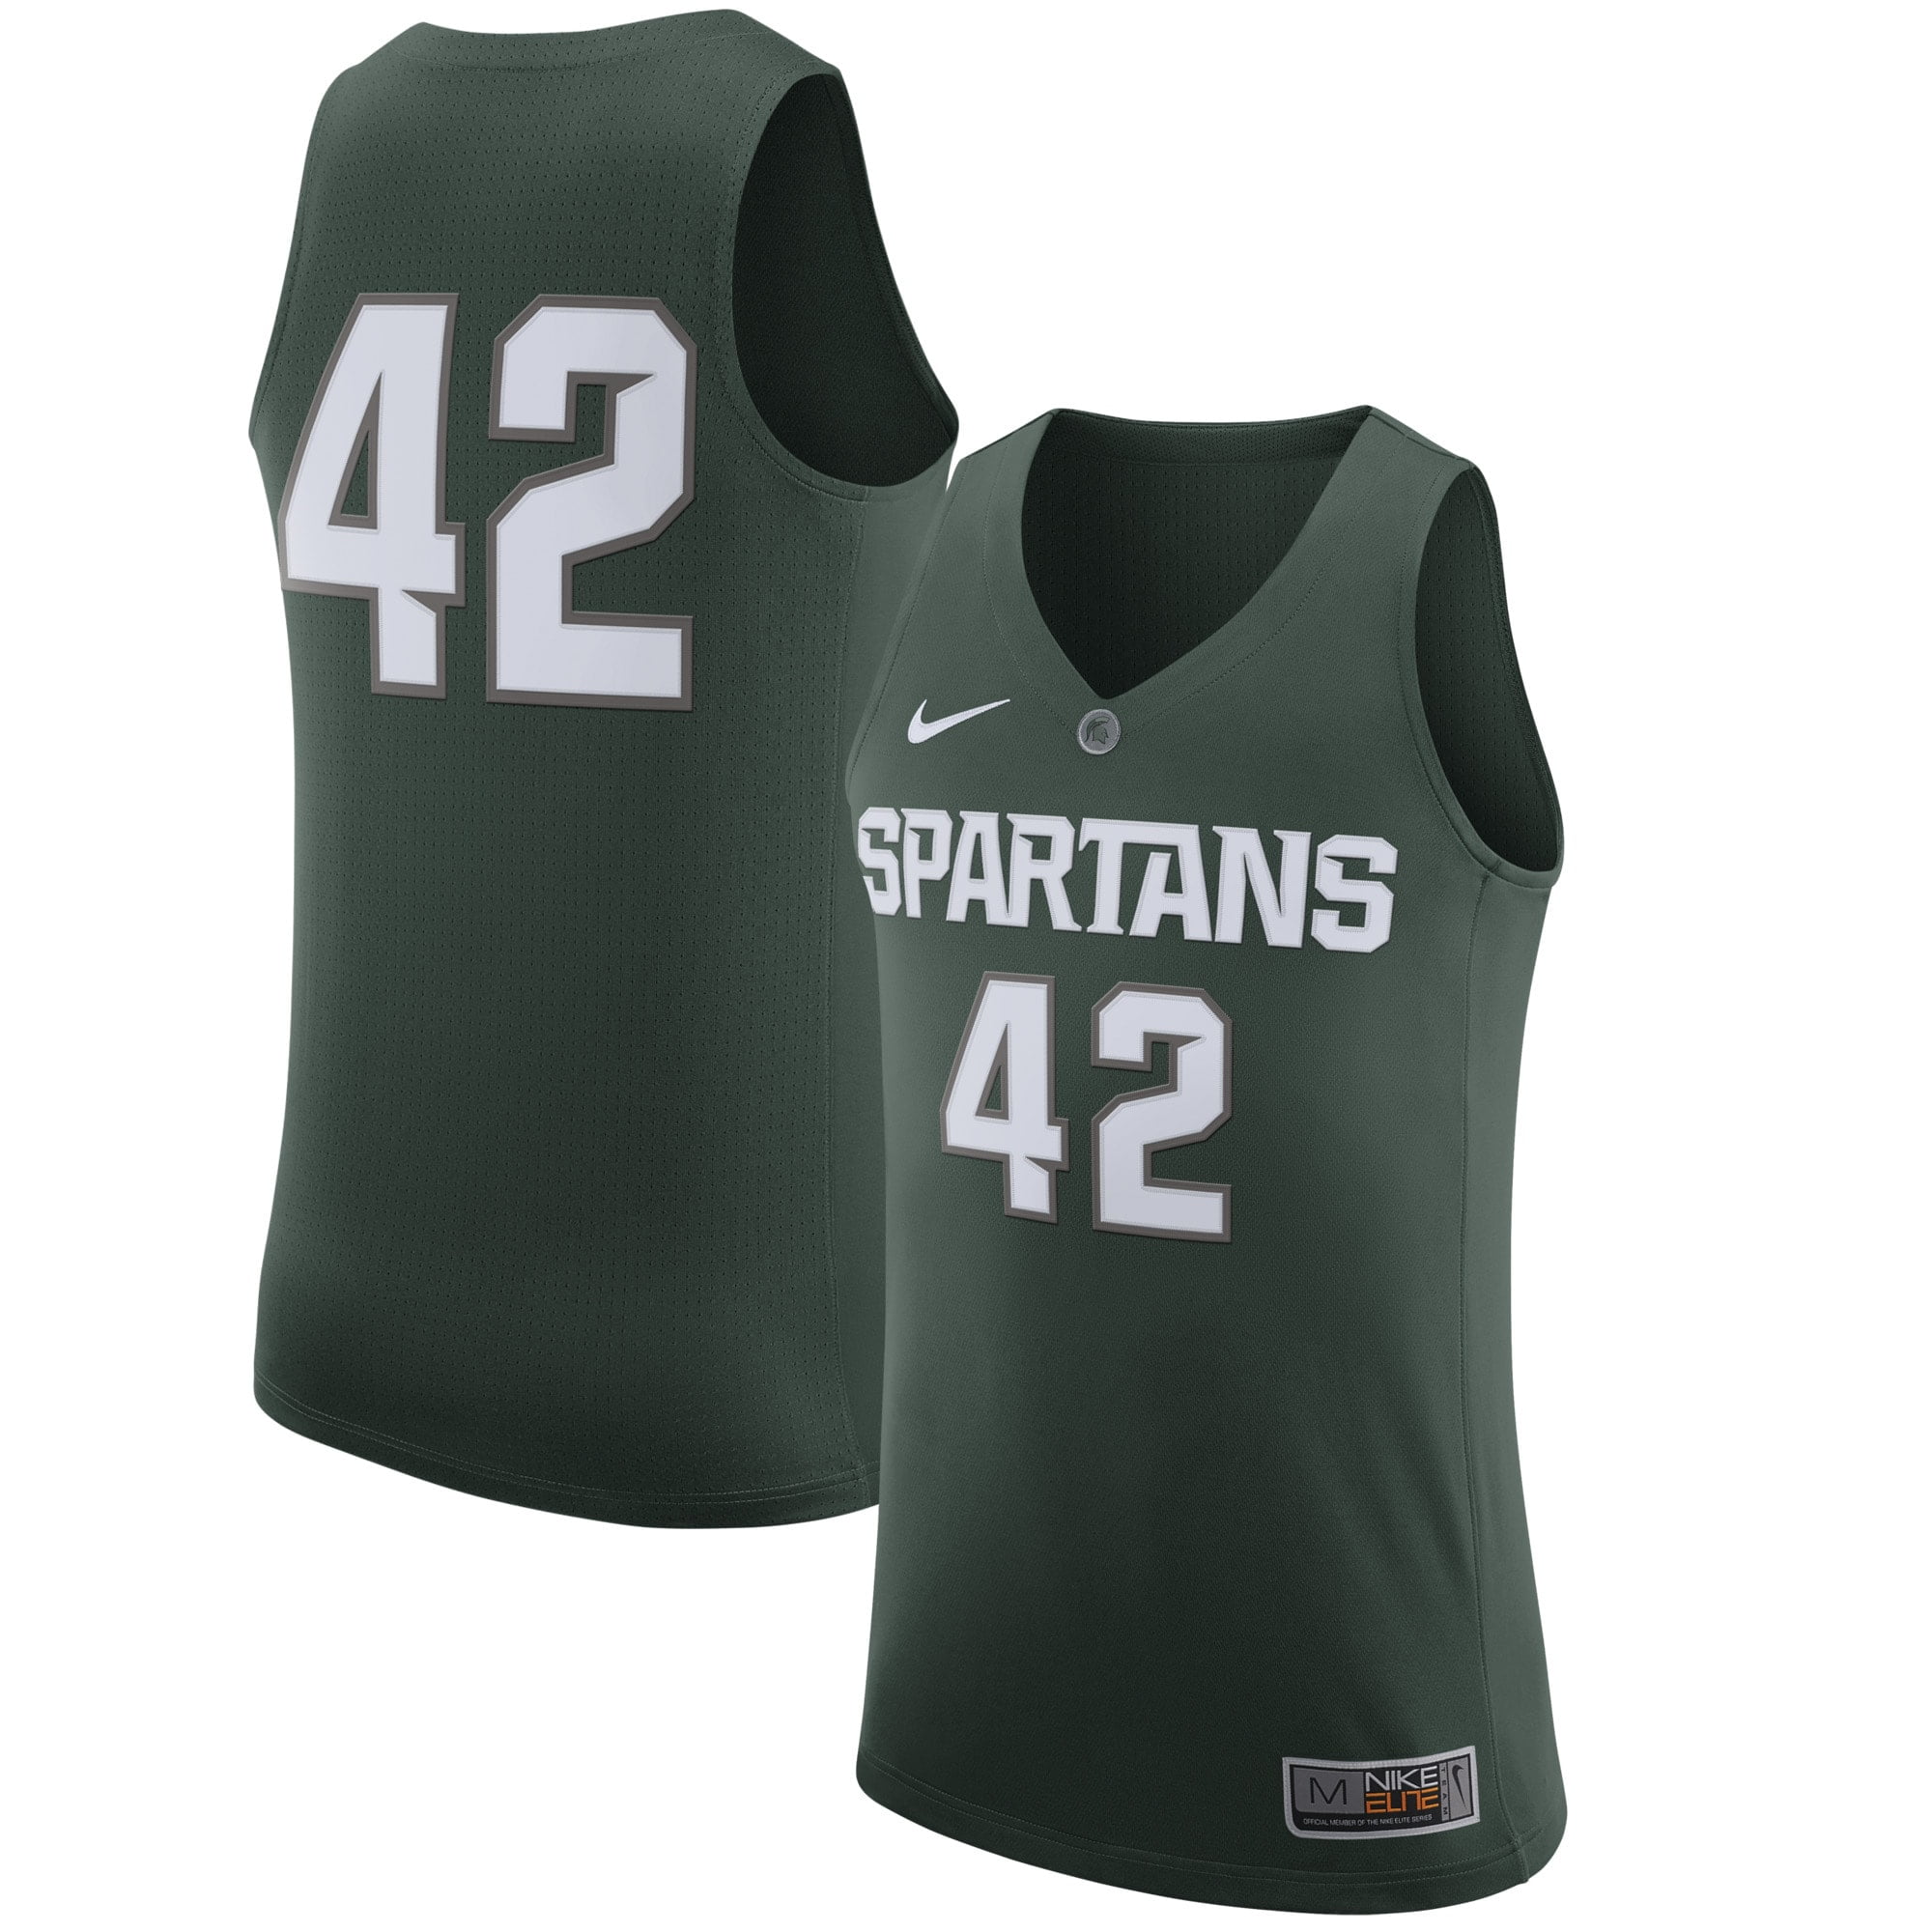  Nike  42 Michigan State Spartans Nike  Authentic 